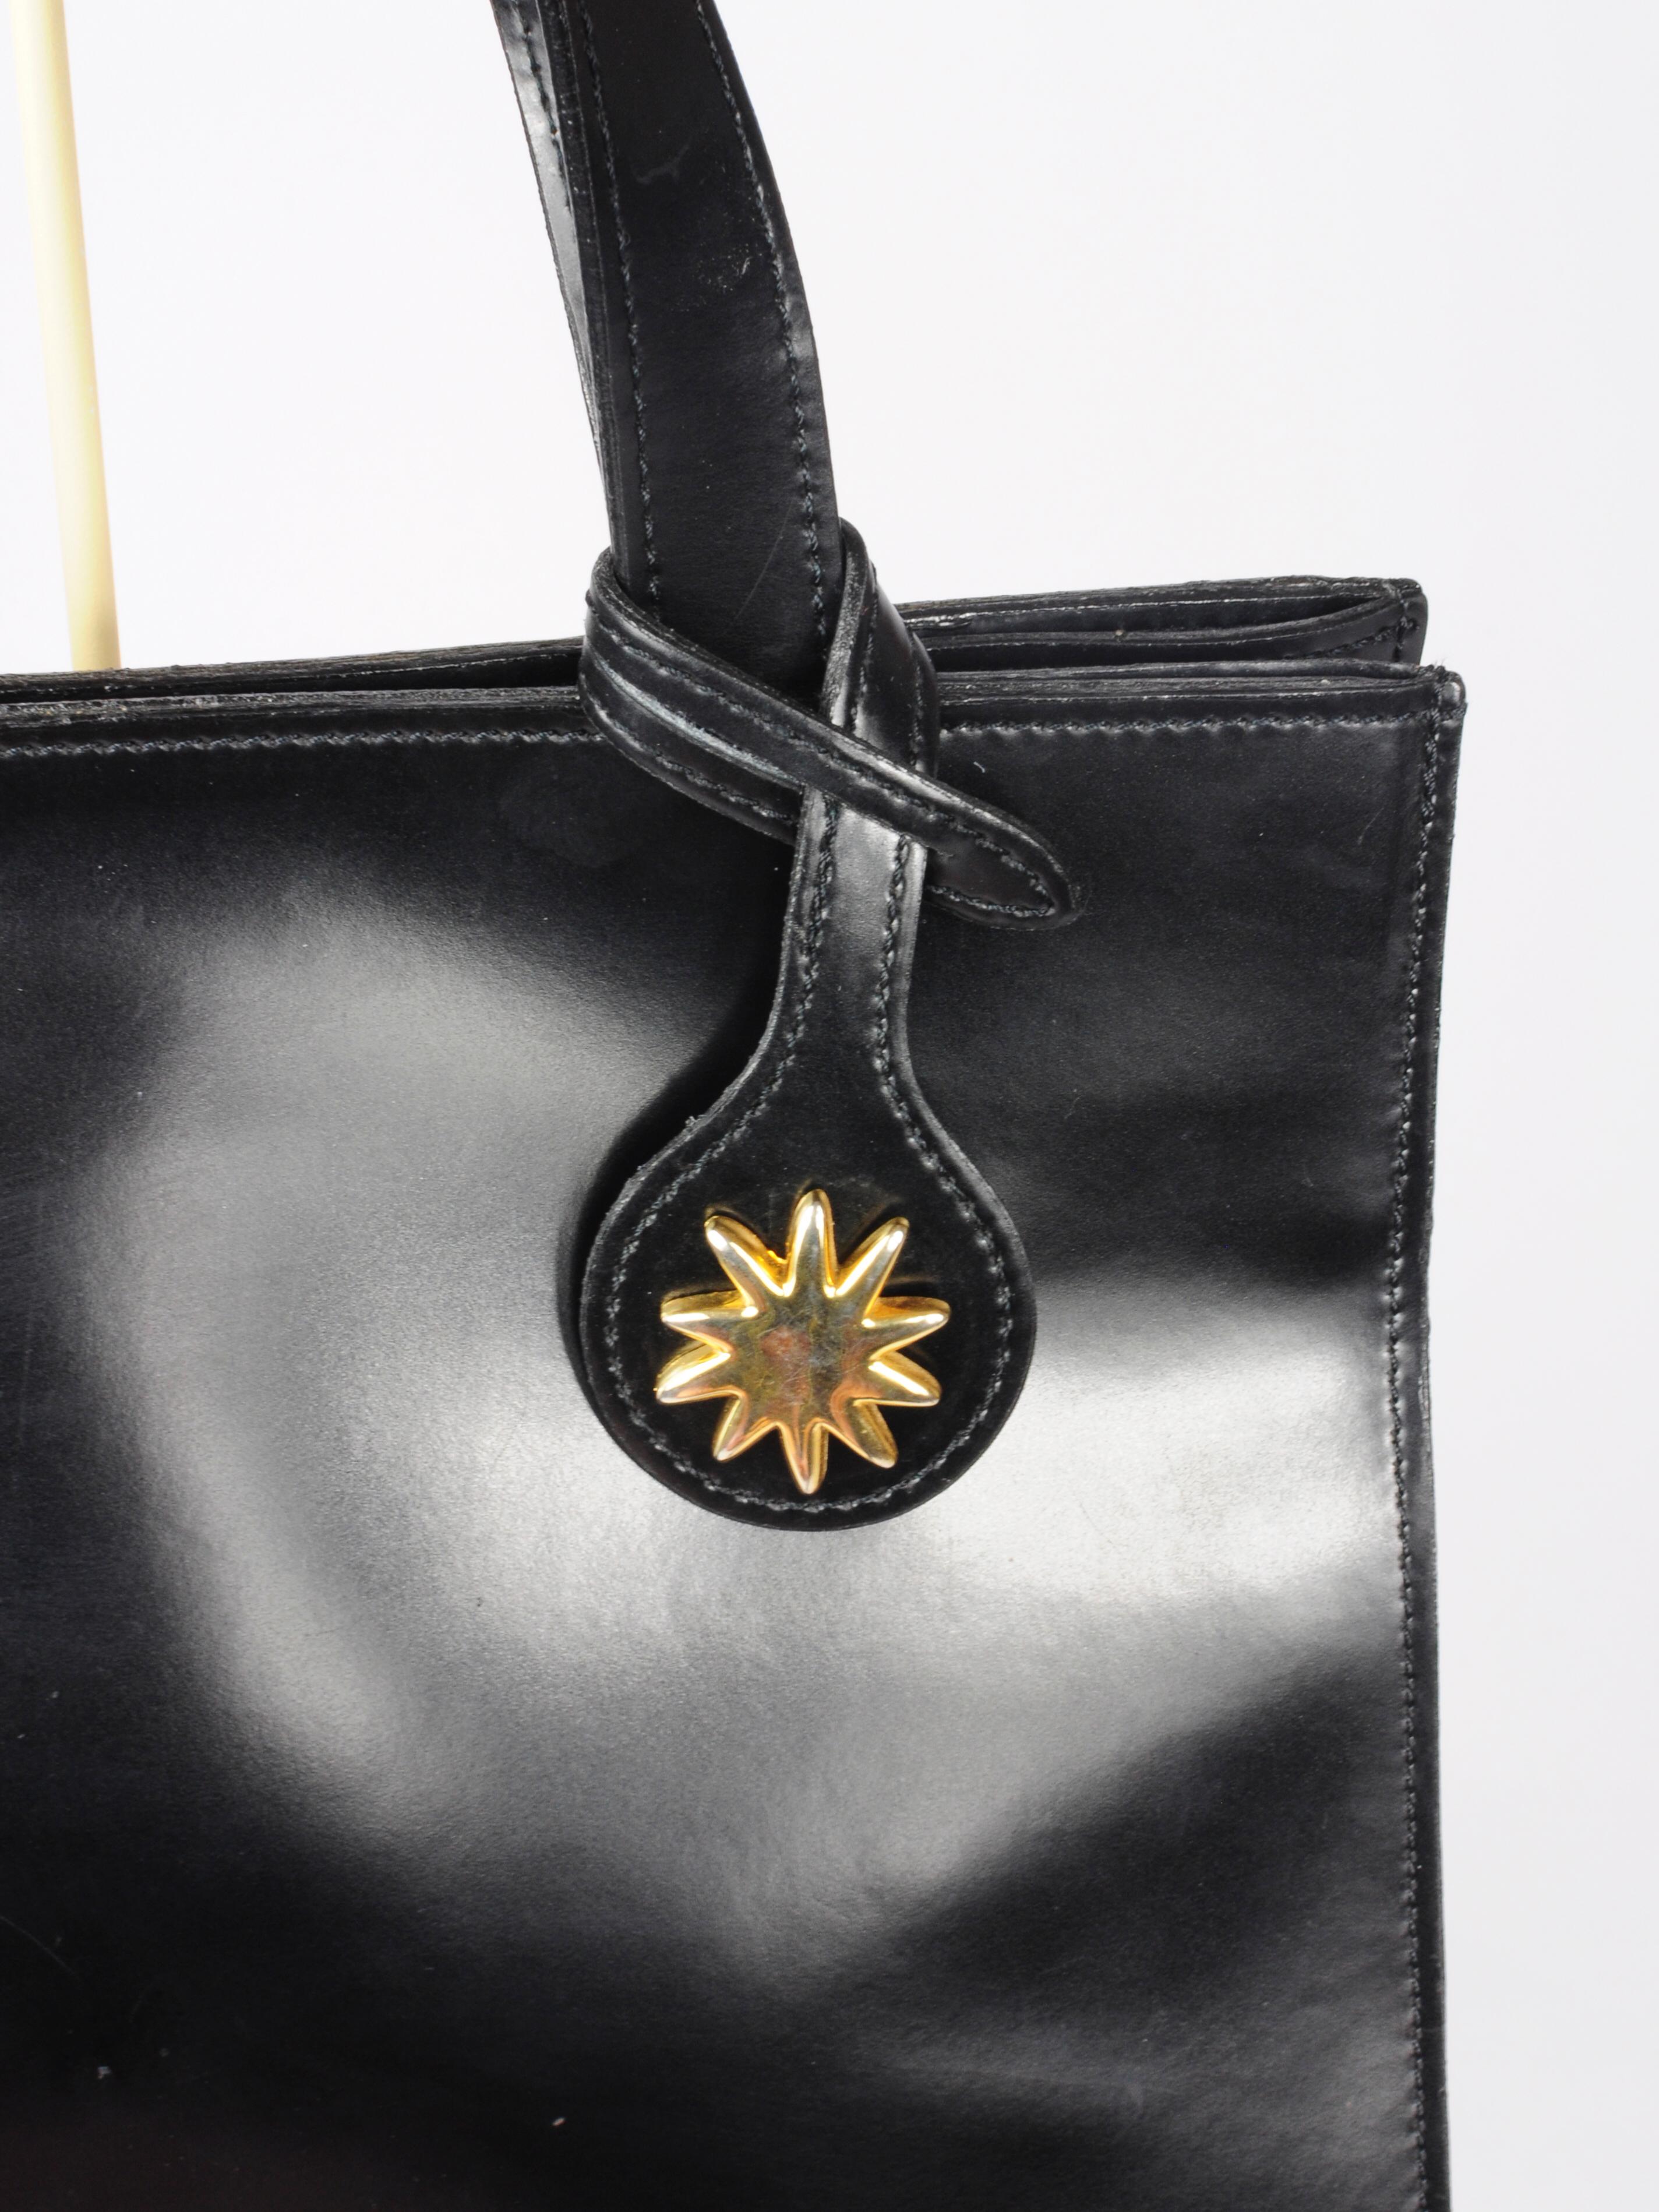 Edouard Rambaud top handle patent leather handbag with interchangeable gold and blue sun brooch pins. The bag comes with a gold sun pin and a silver sun pin, and are interchangeable depending on how you want to match with your outfit. The sun charm